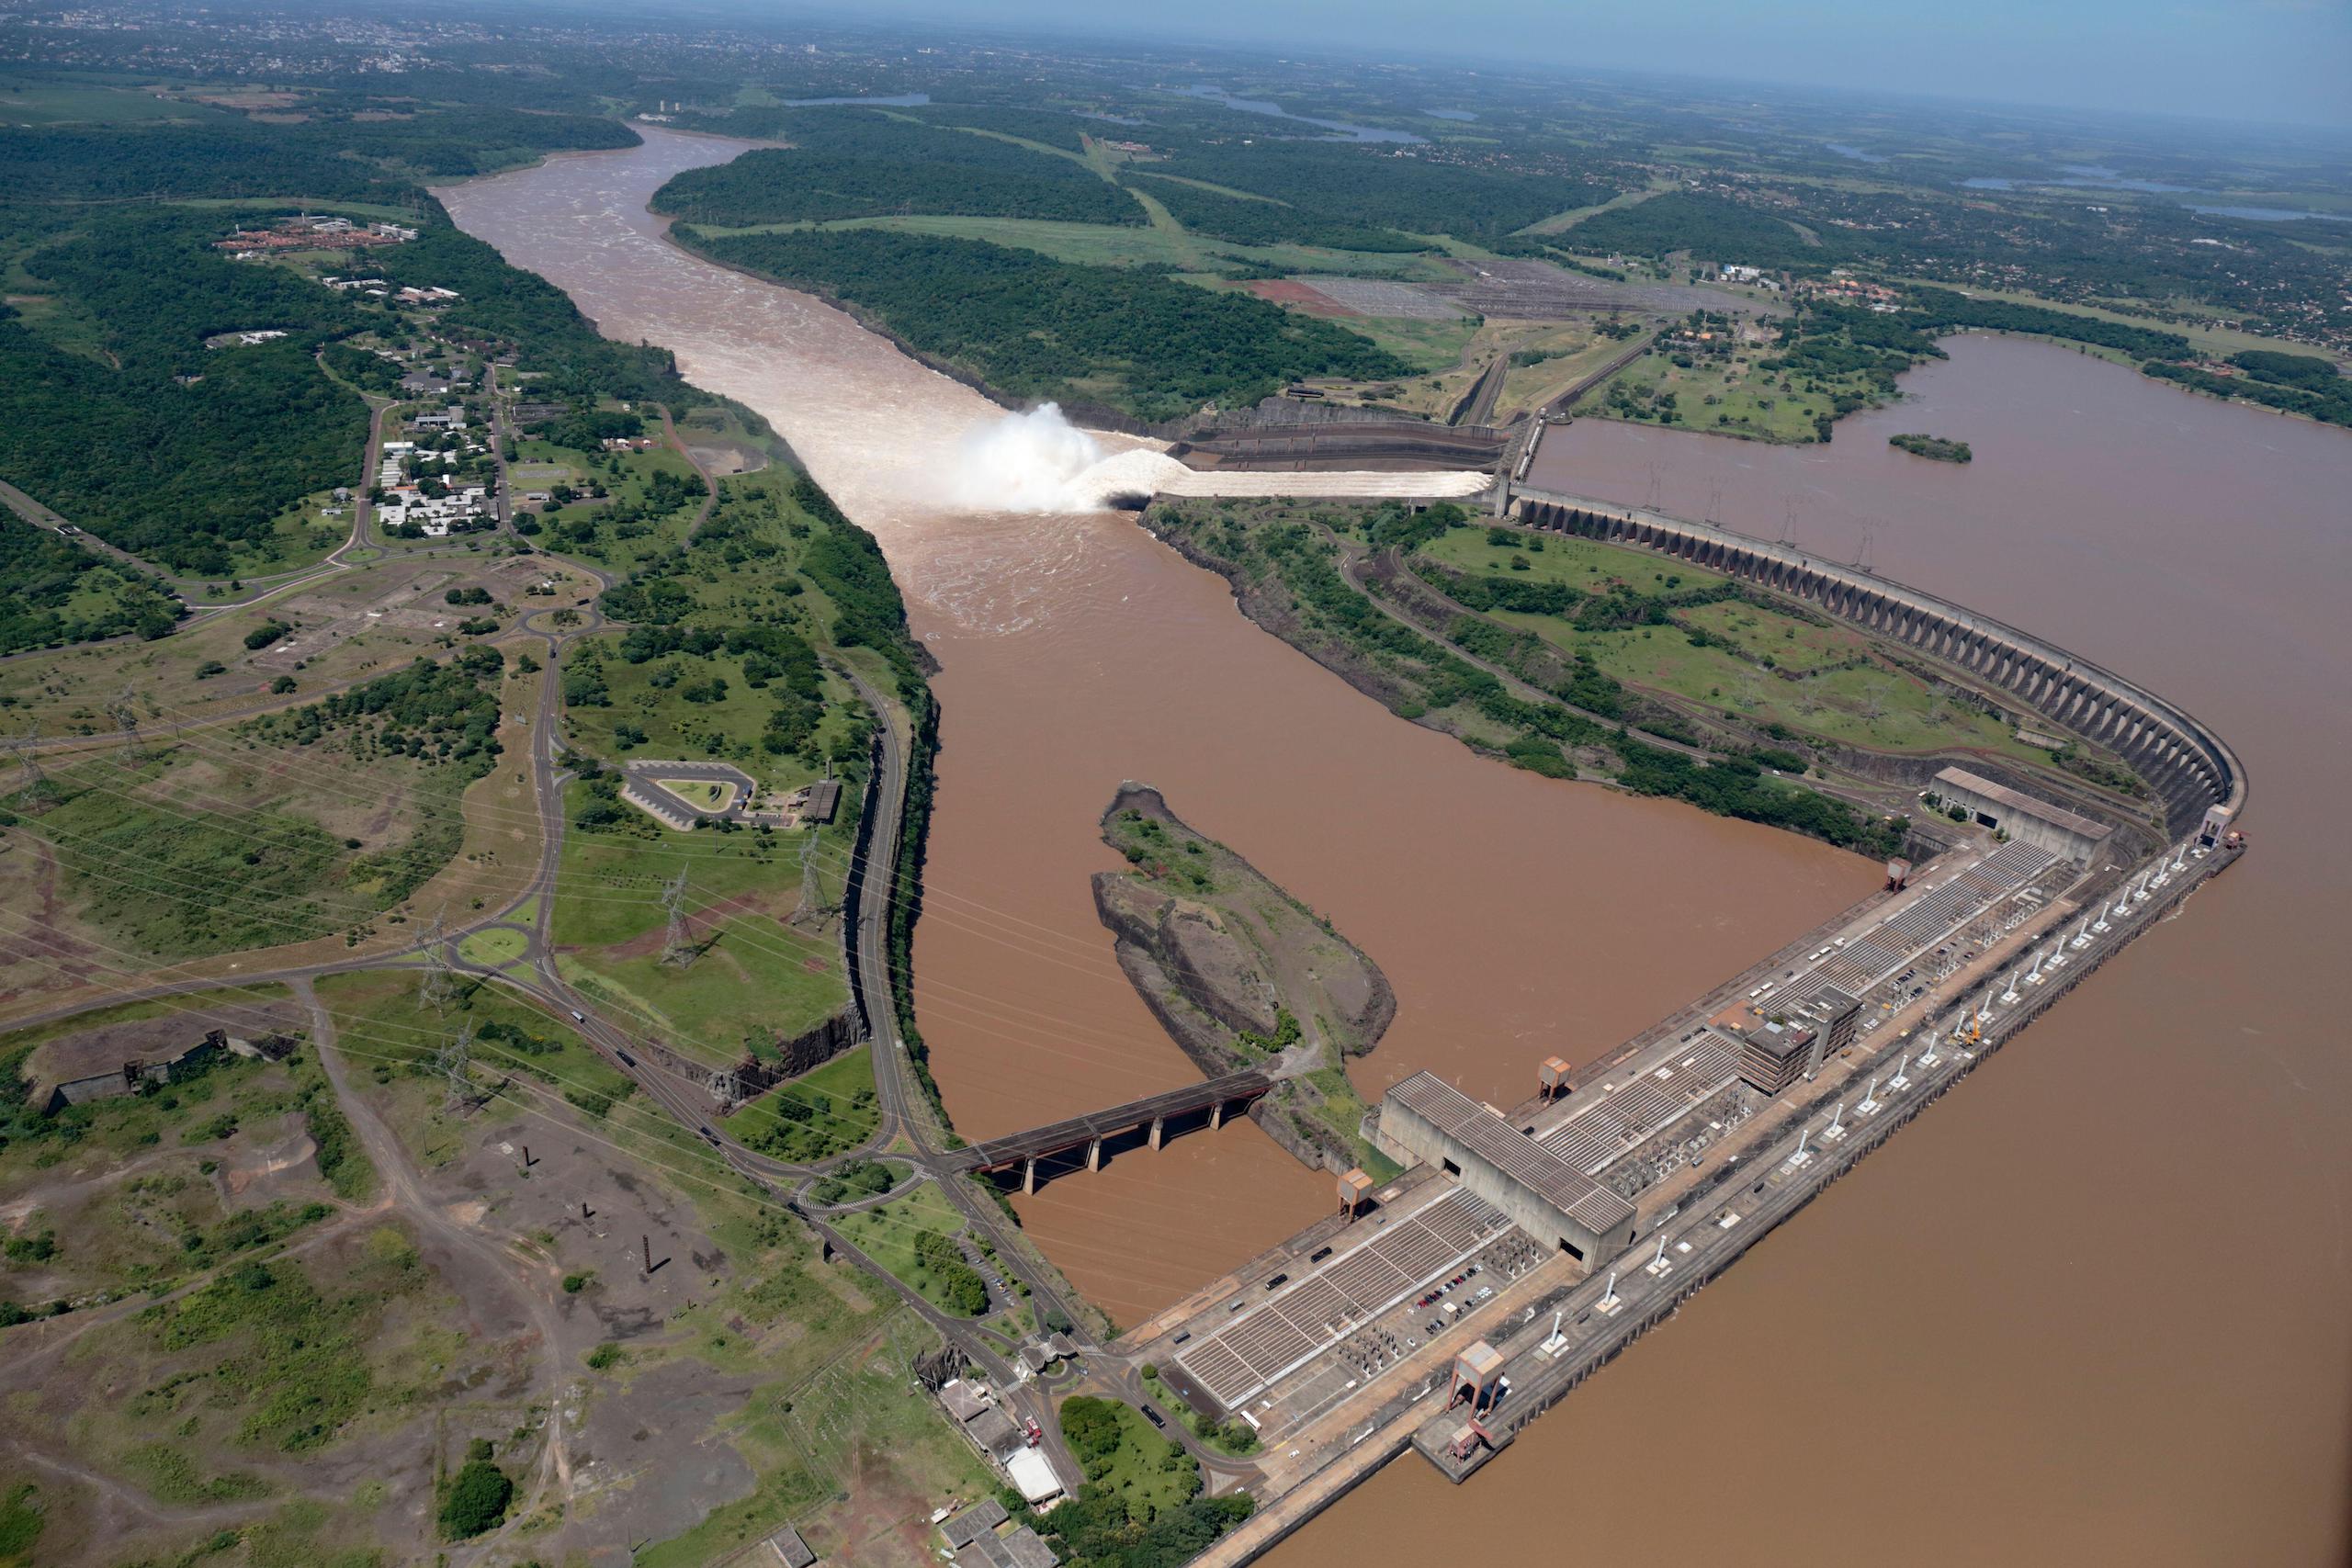 <p>The Itaipu dam, shared by Brazil and Paraguay, is the world’s third largest hydroelectric power plant. The renegotiation of the treaty between the two countries that governs the dam has seen uncertainty and disagreements over tariffs. (Image: John Holmes / Alamy)</p>